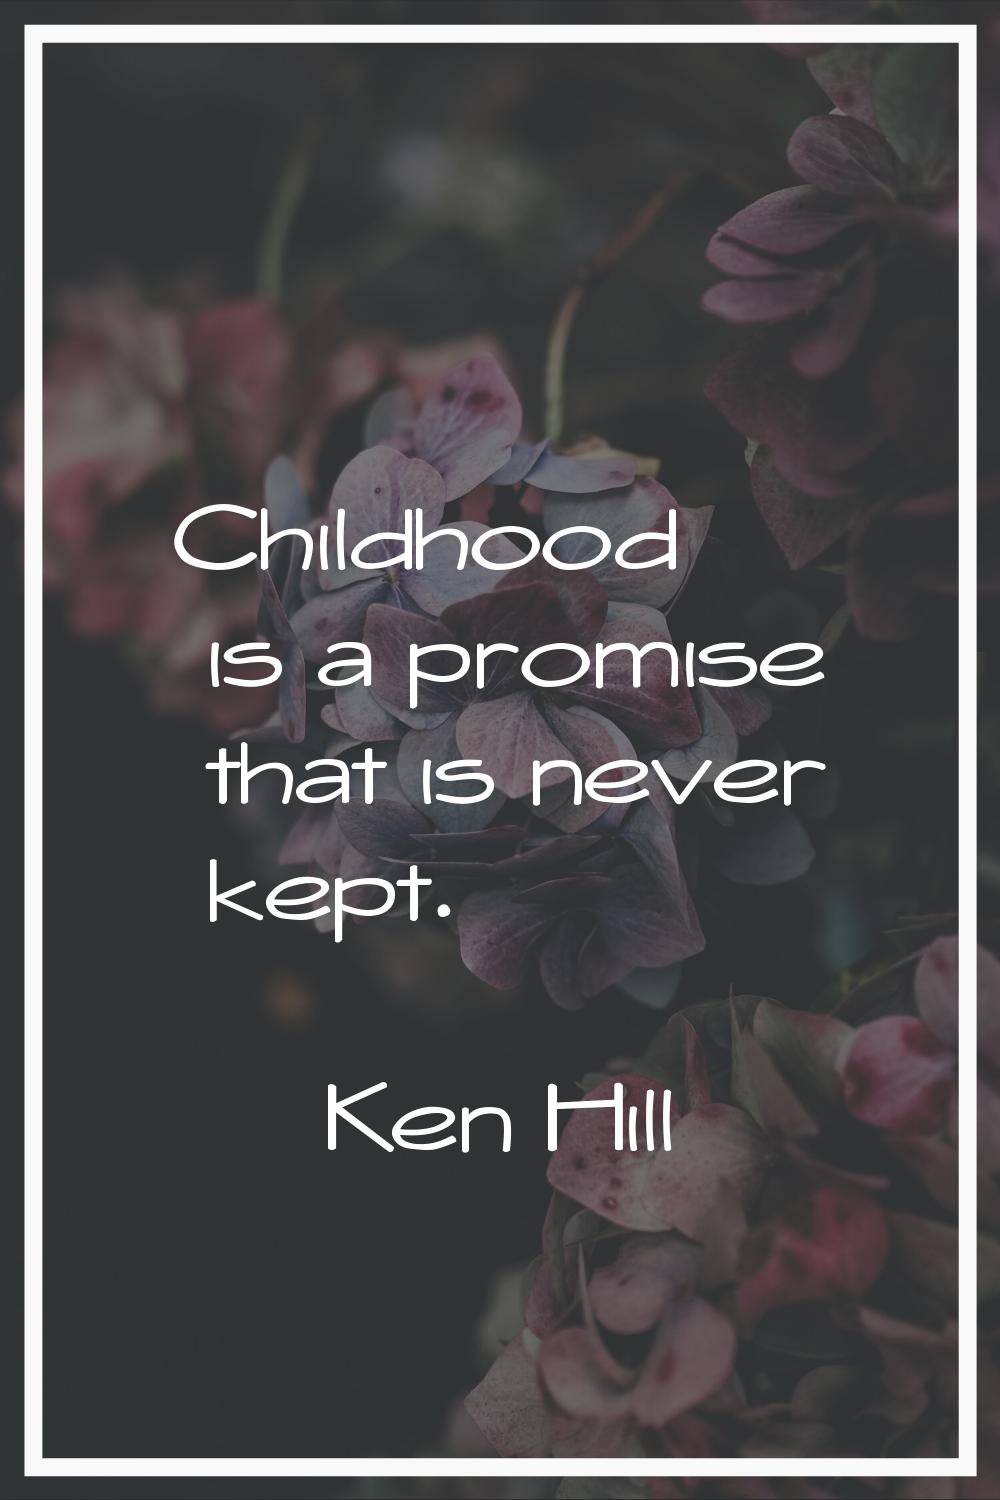 Childhood is a promise that is never kept.